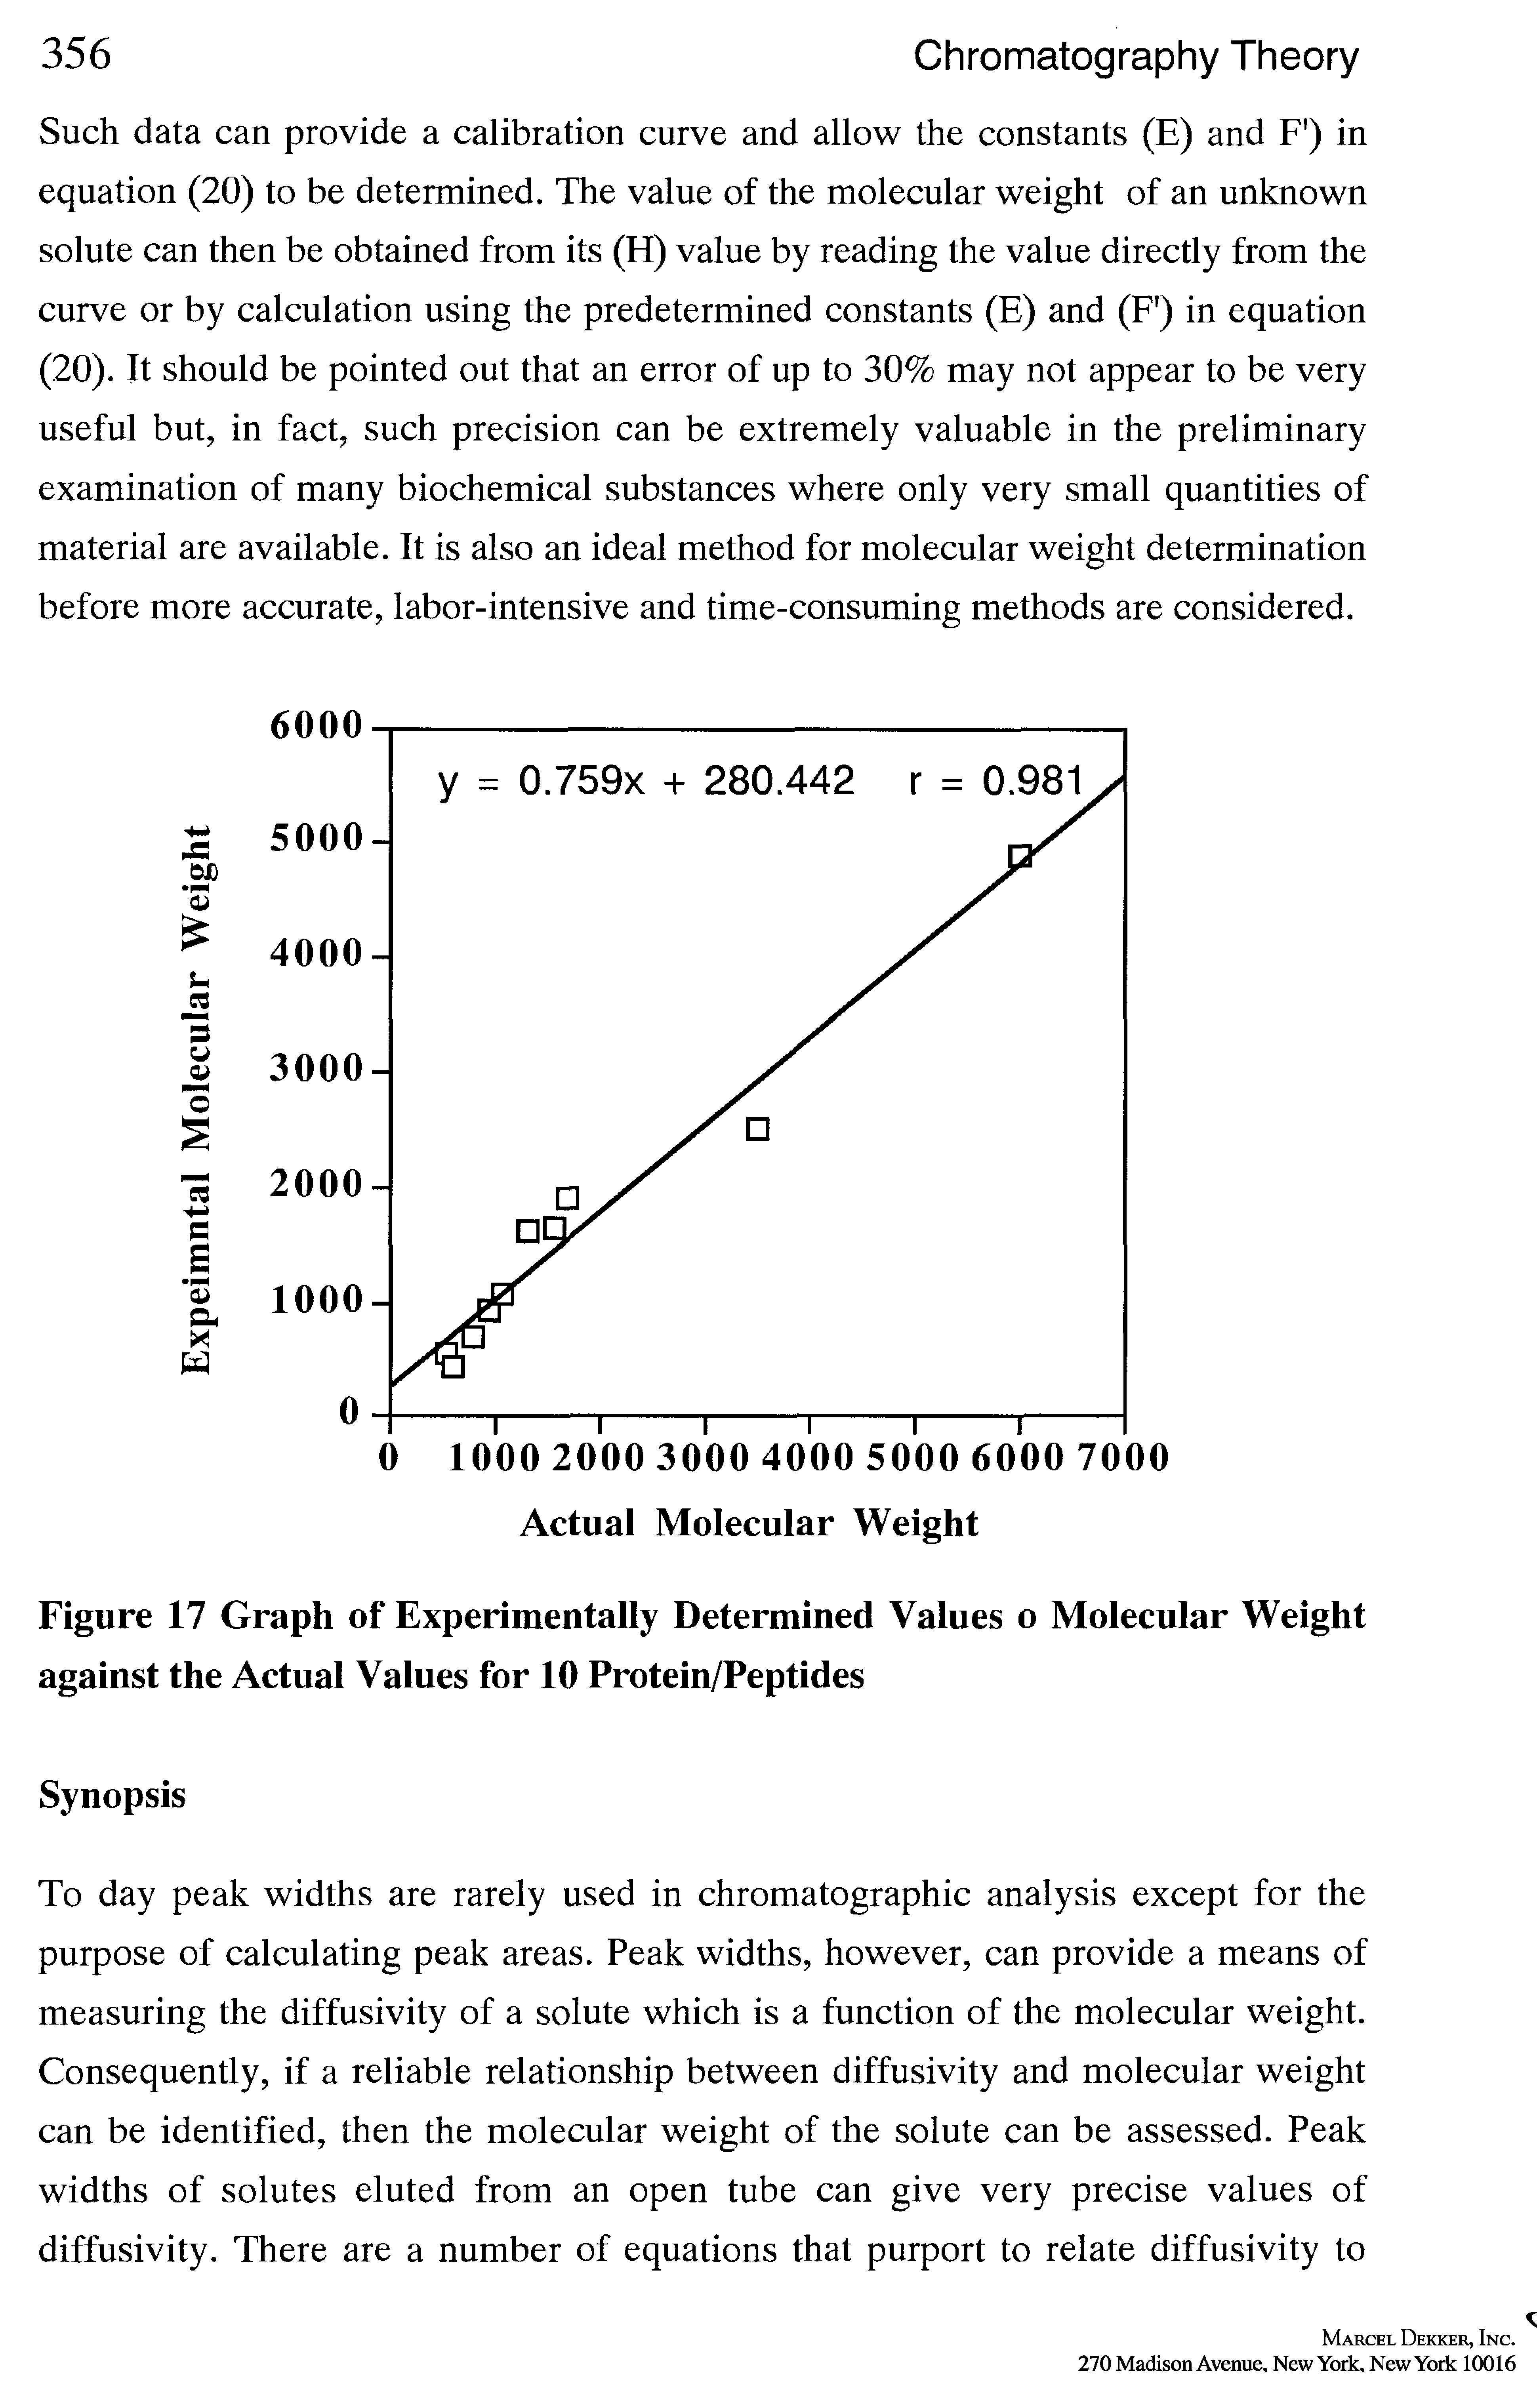 Figure 17 Graph of Experimentally Determined Values o Molecular Weight against the Actual Values for 10 Protein/Peptides...